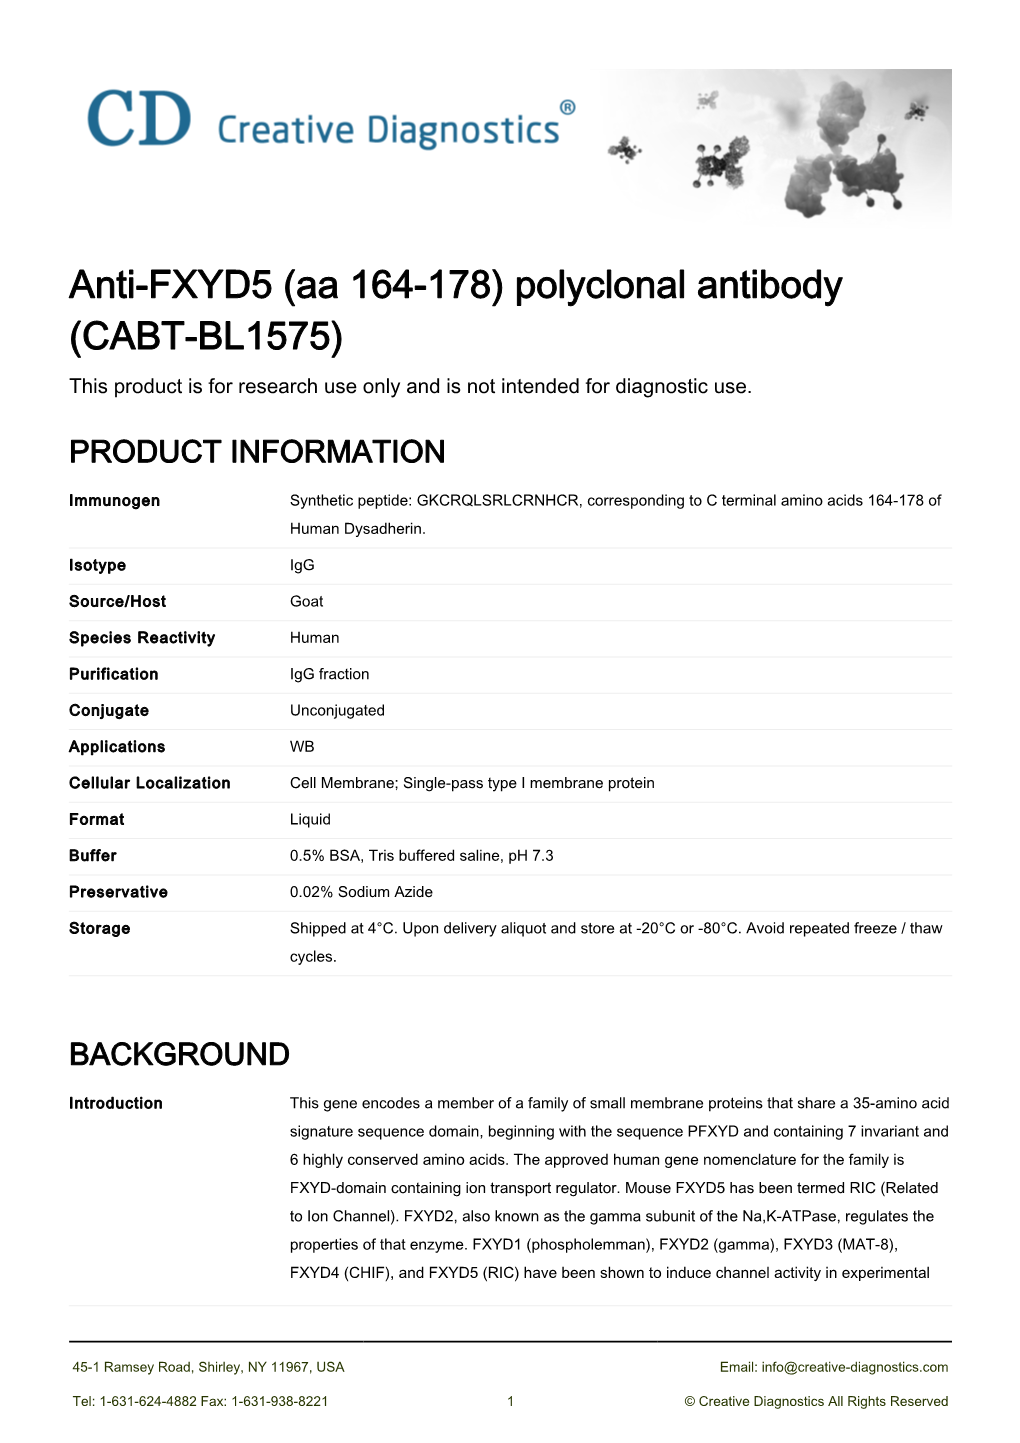 Anti-FXYD5 (Aa 164-178) Polyclonal Antibody (CABT-BL1575) This Product Is for Research Use Only and Is Not Intended for Diagnostic Use